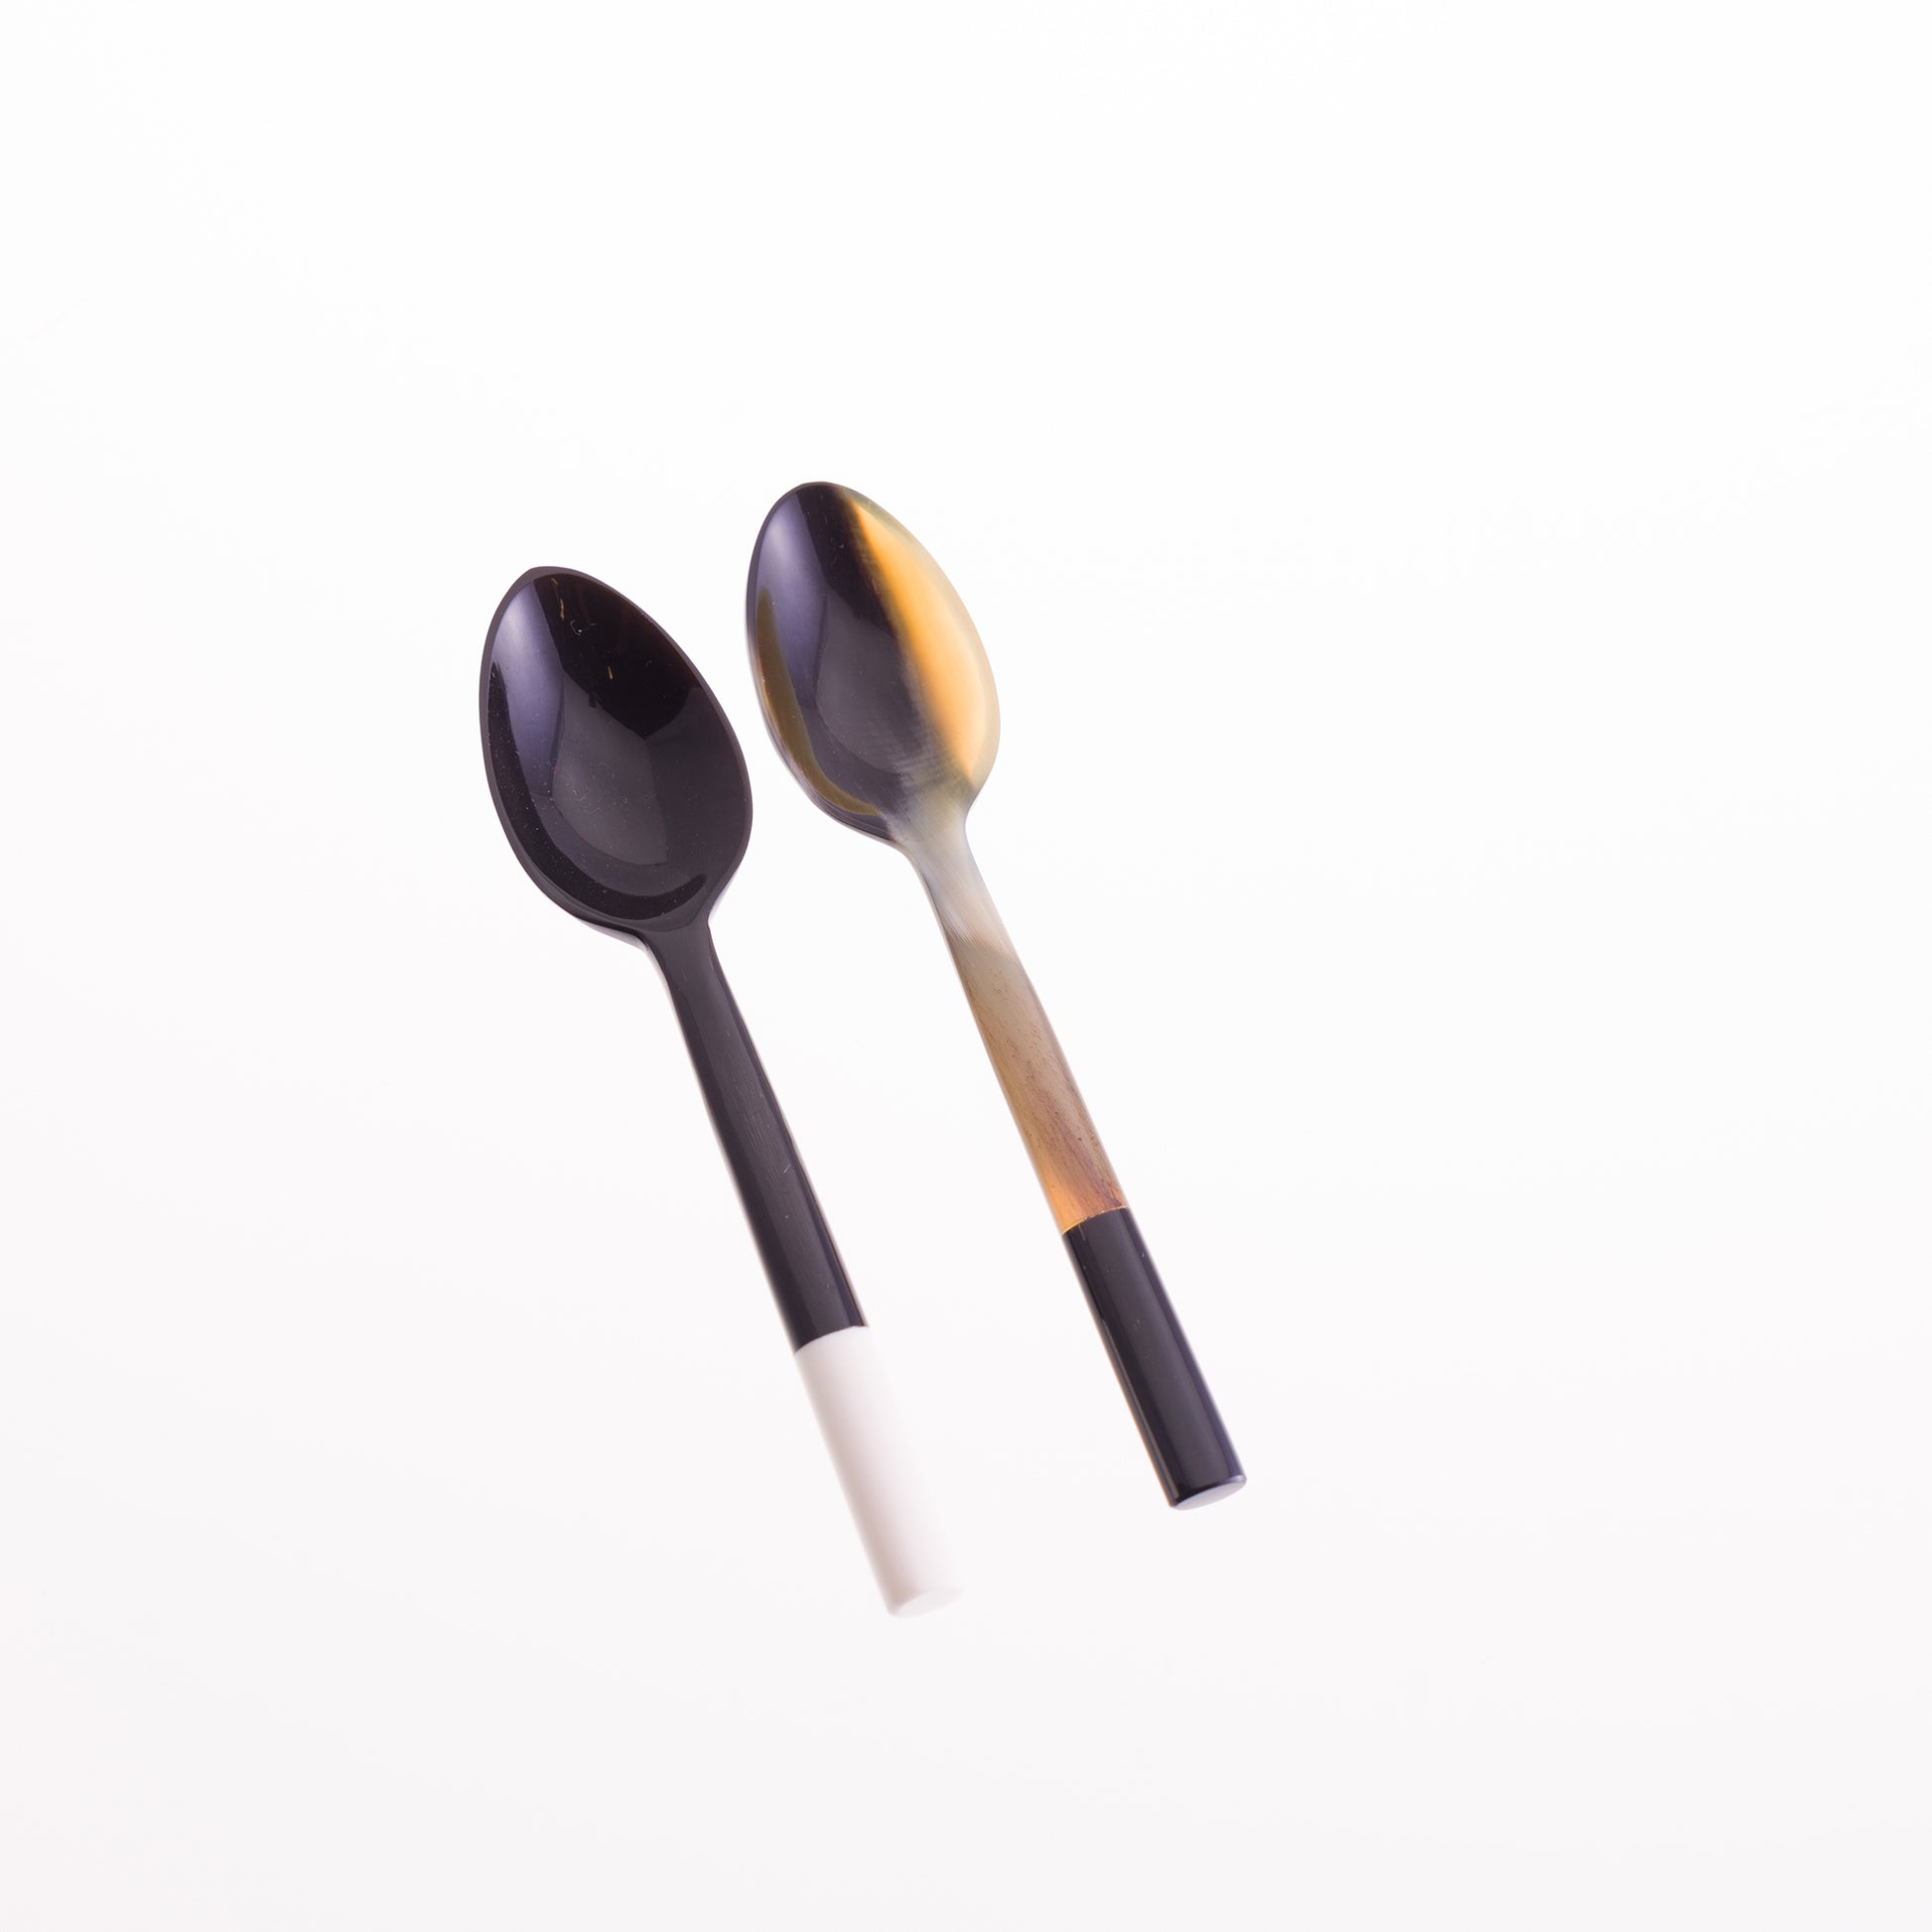 A pair of horn egg spoons. The first is black horn with a white bone tip the second is natural horn with a black tip.